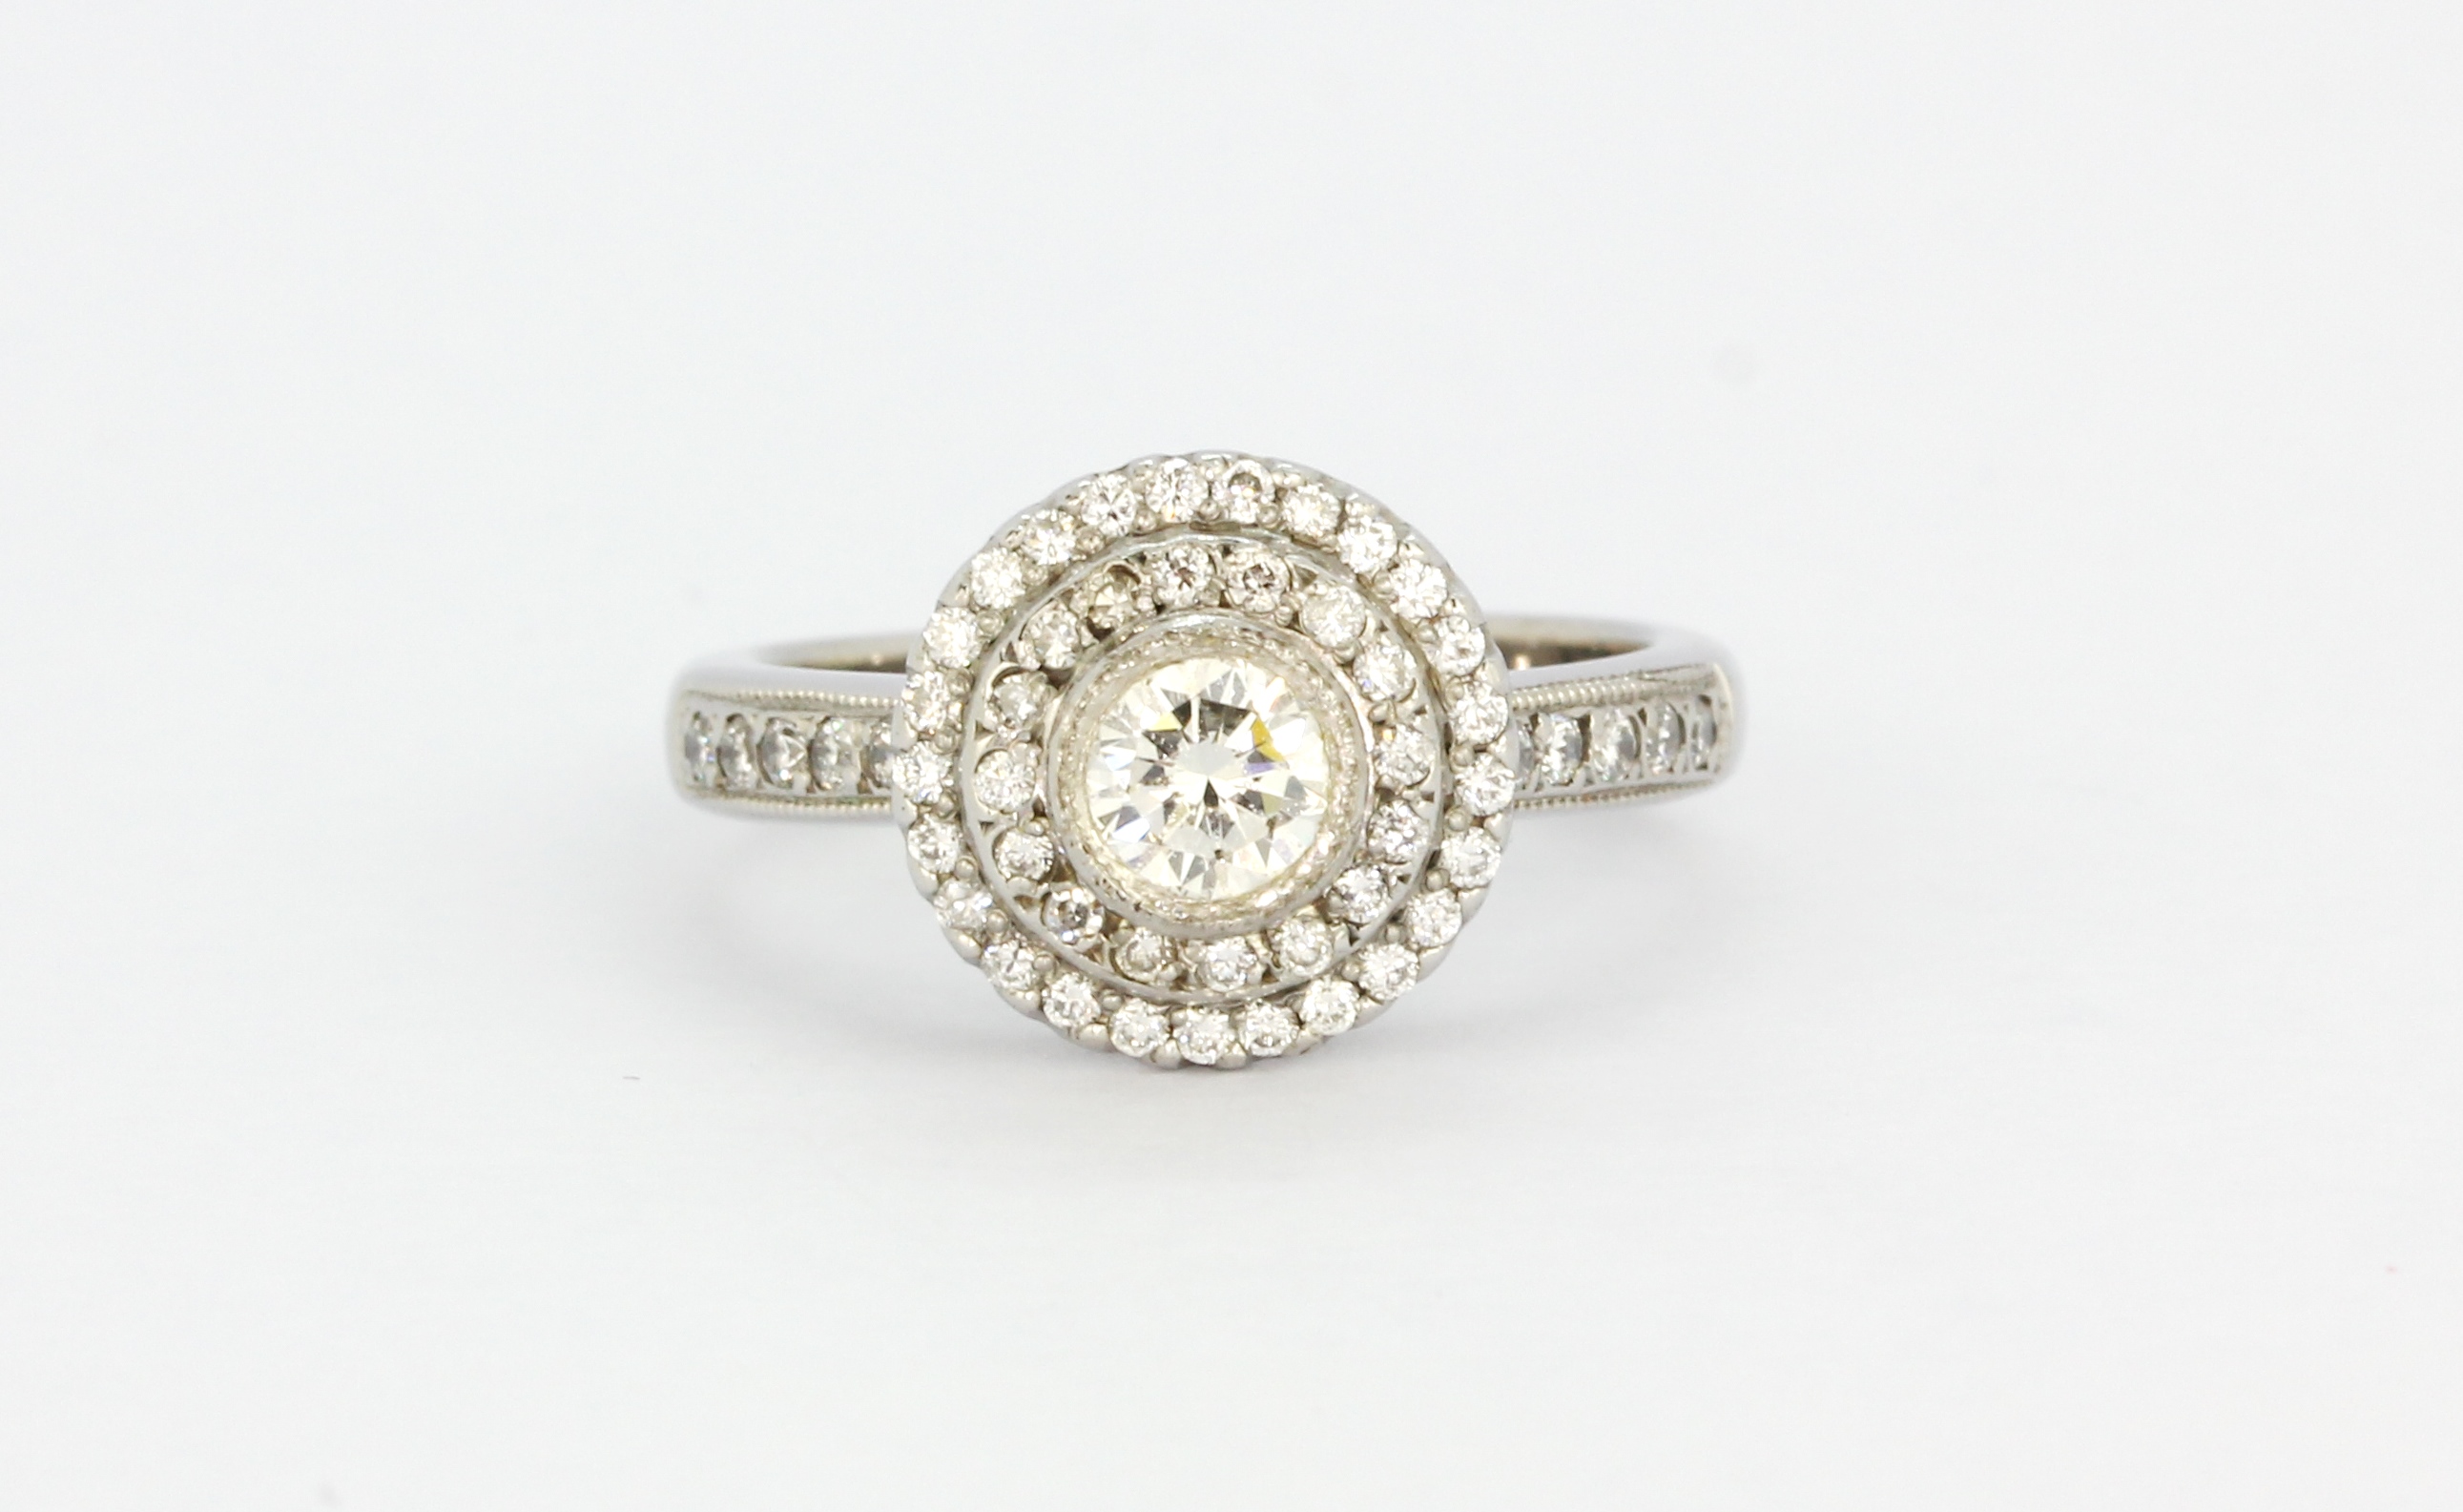 An 18ct white gold halo ring set with a brilliant cut centre diamond surrounded by brilliant cut